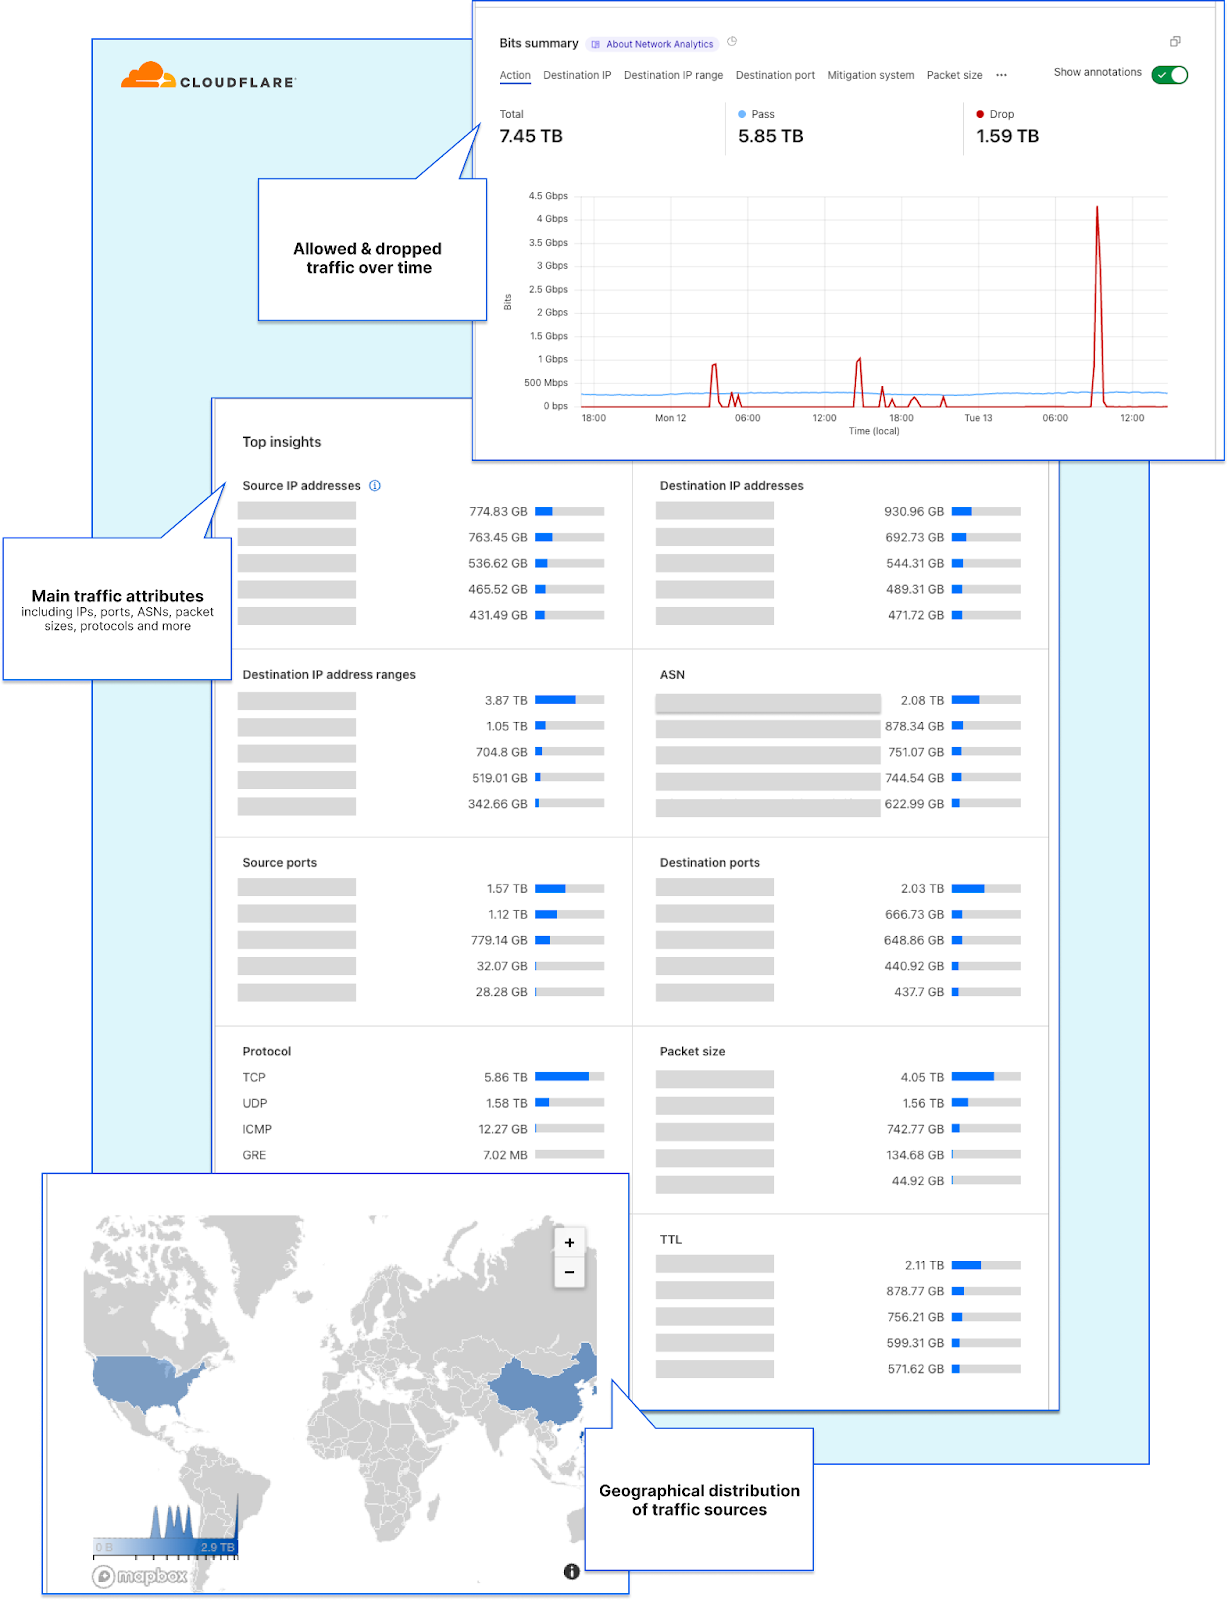 Introducing Cloudflare’s new Network Analytics dashboard